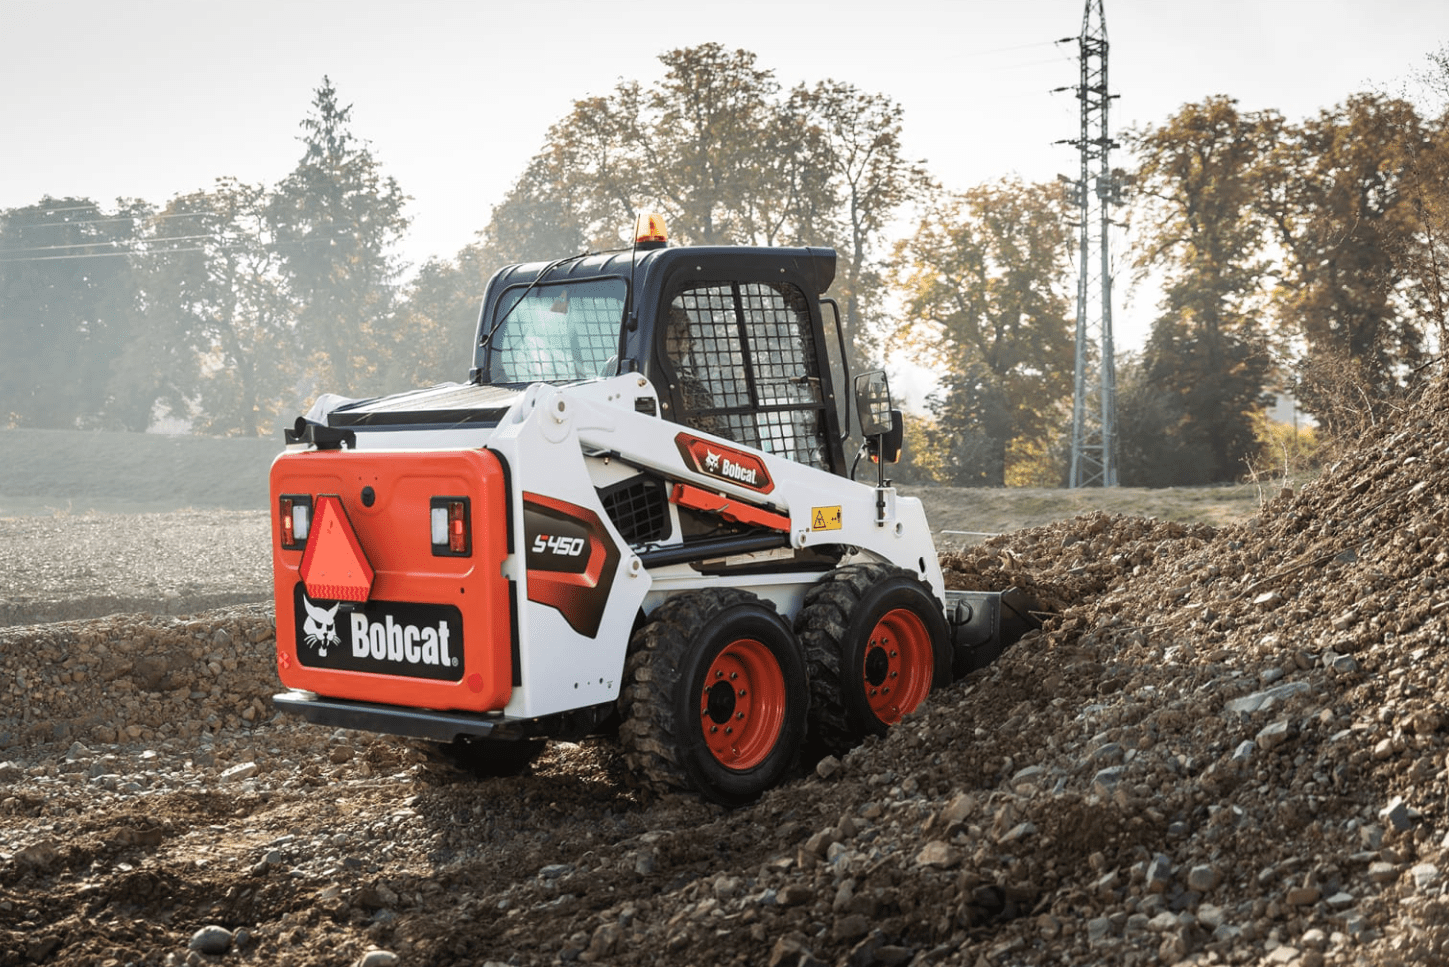 Browse Specs and more for the S450 Skid-Steer Loader - Bobcat of the Rockies